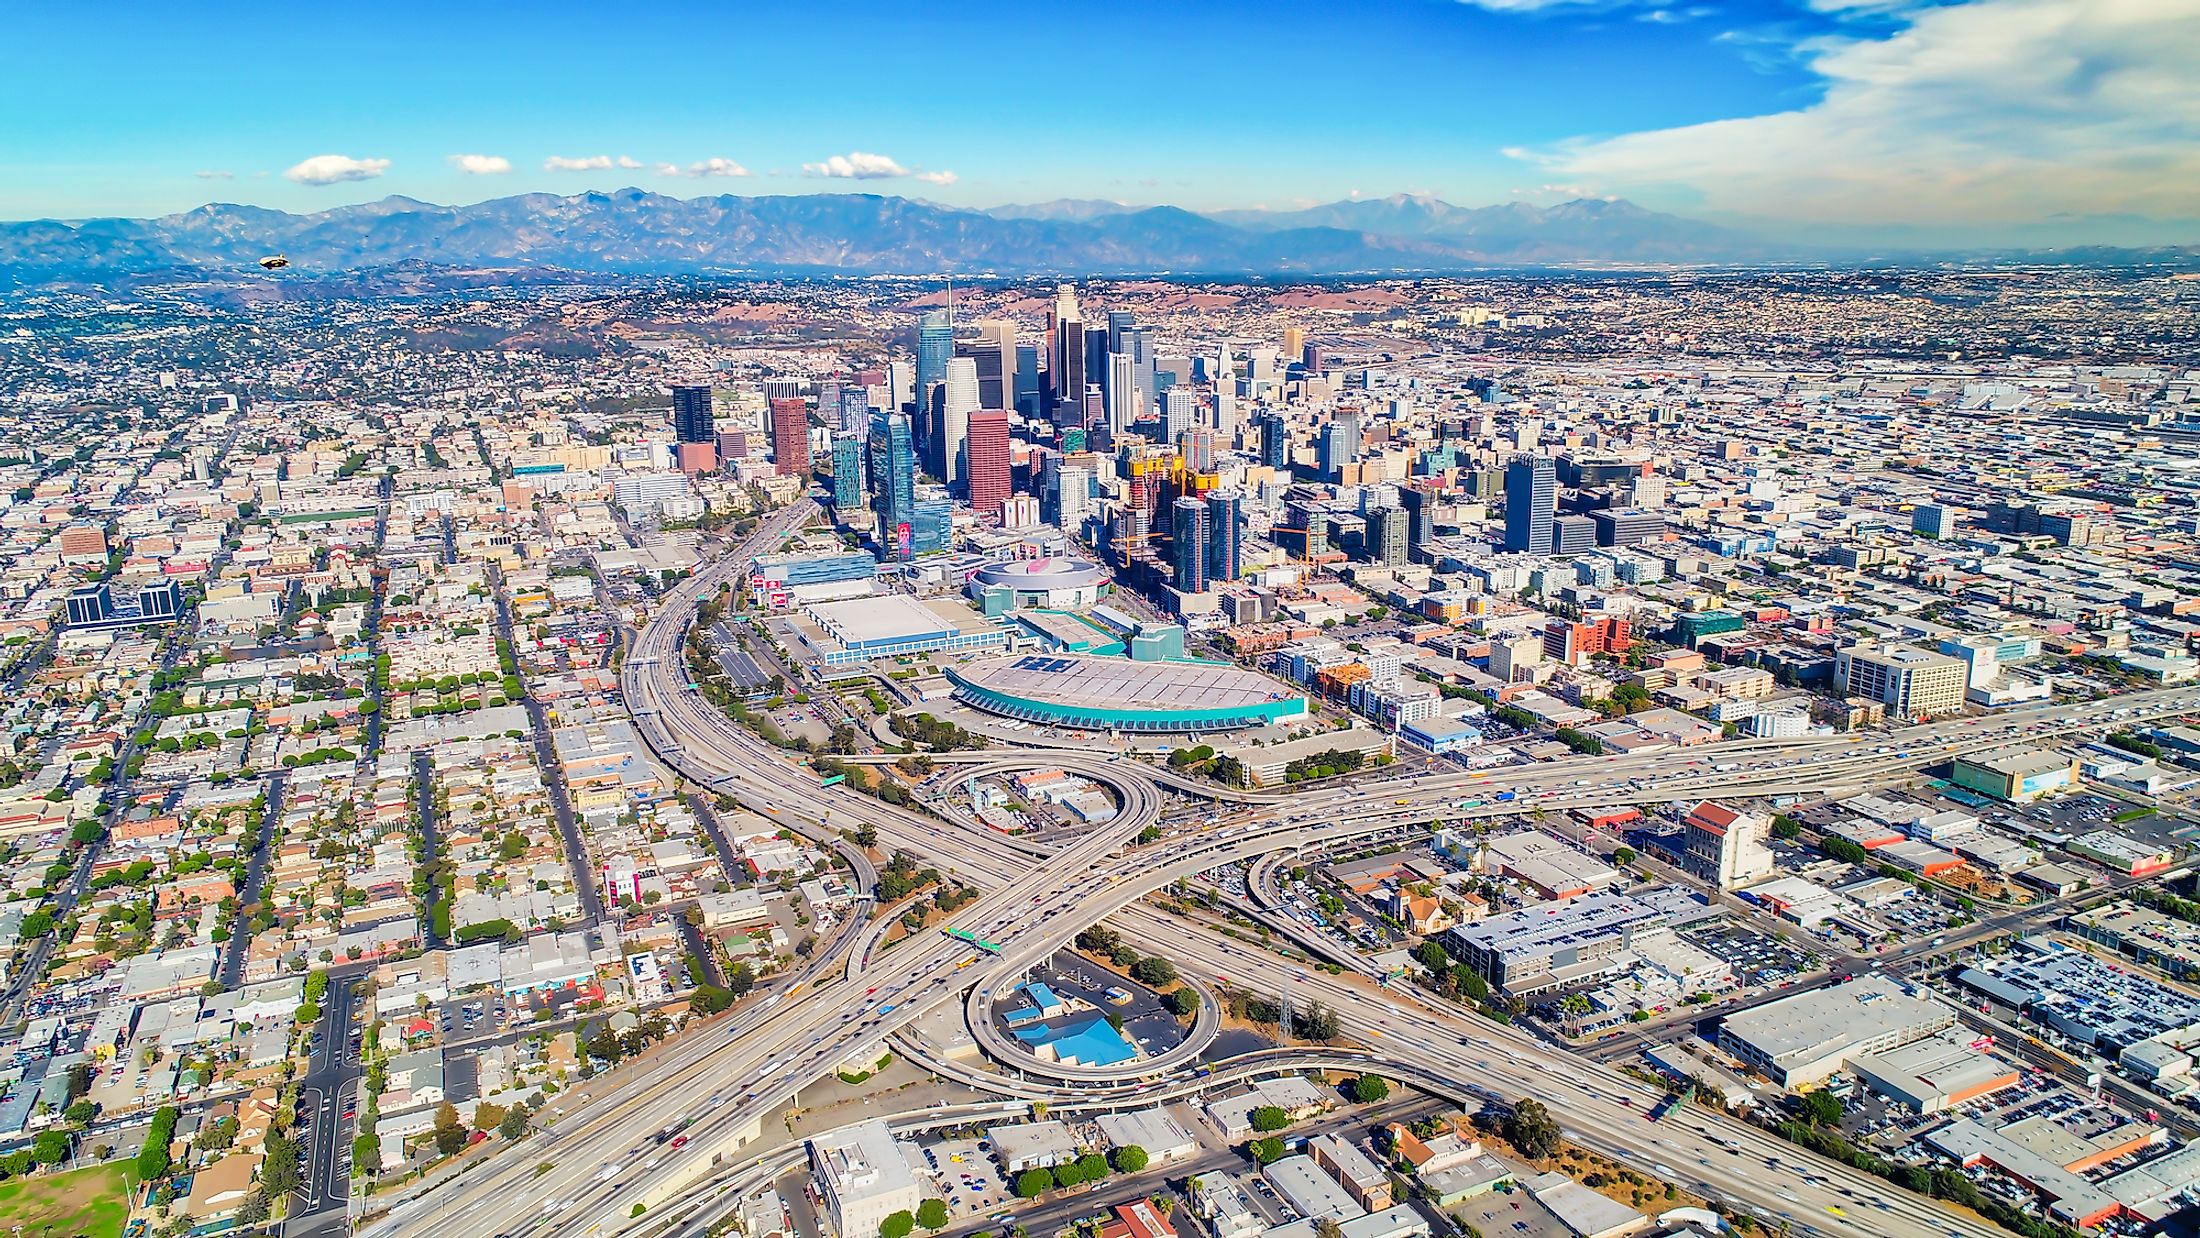 Aerial view of Los Angeles, California.